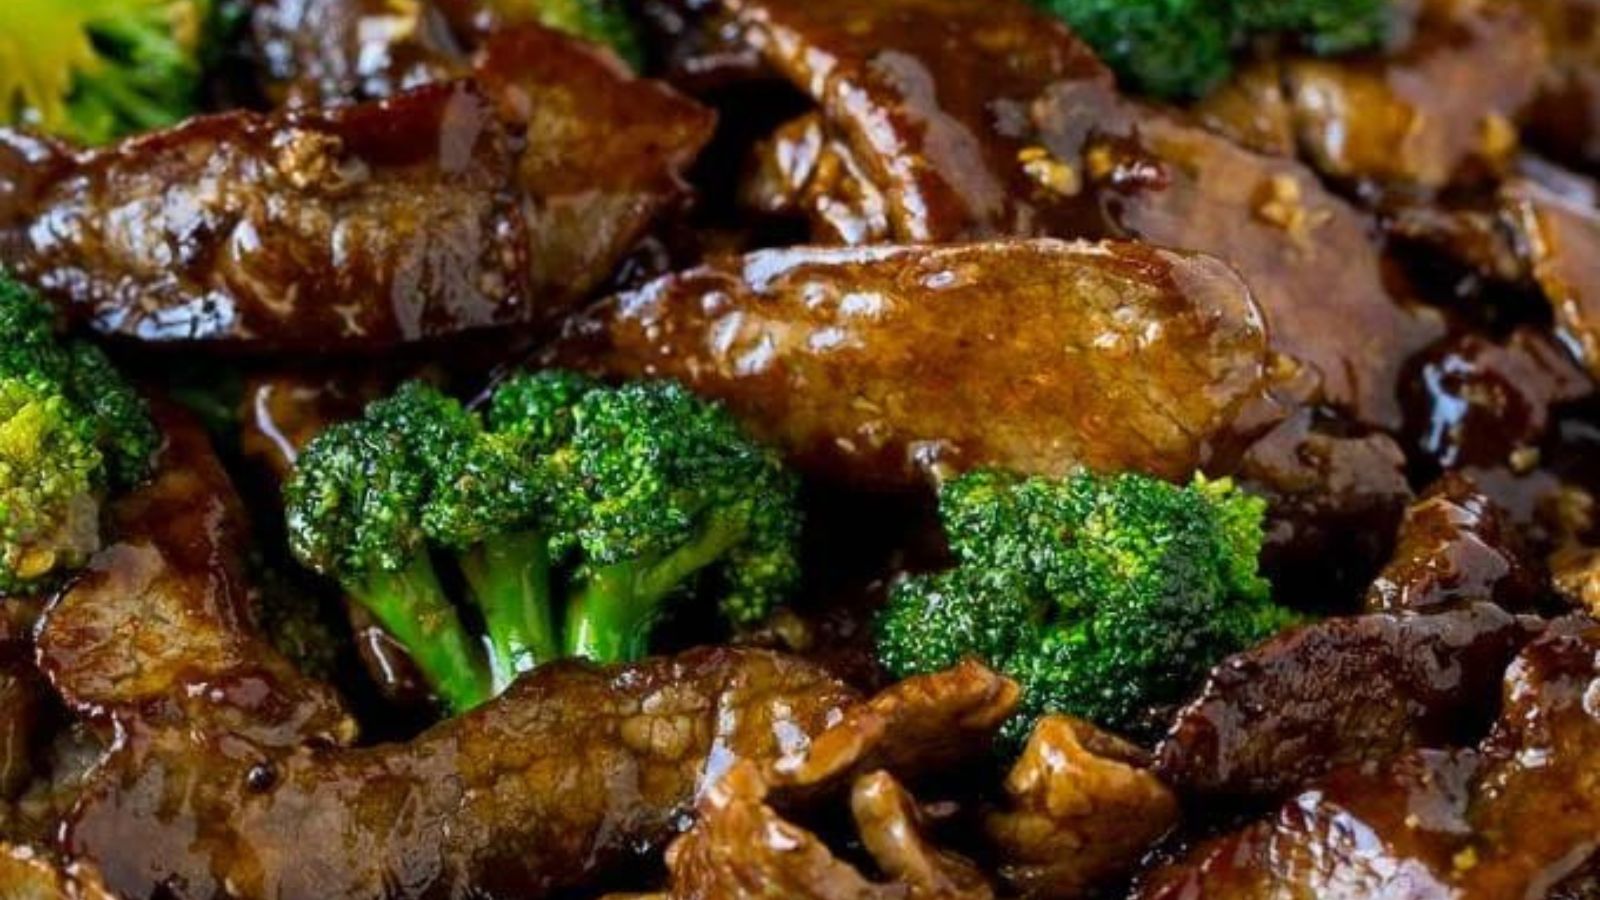 <p>This recipe for beef and broccoli stir fry is a classic dish of beef sauteed with fresh broccoli florets and coated in a savory sauce. You can have a healthy and easy dinner on the table in less than 30 minutes!</p><p><strong>Recipe: <a href="https://www.dinneratthezoo.com/beef-and-broccoli-stir-fry/">beef and broccoli</a></strong></p>